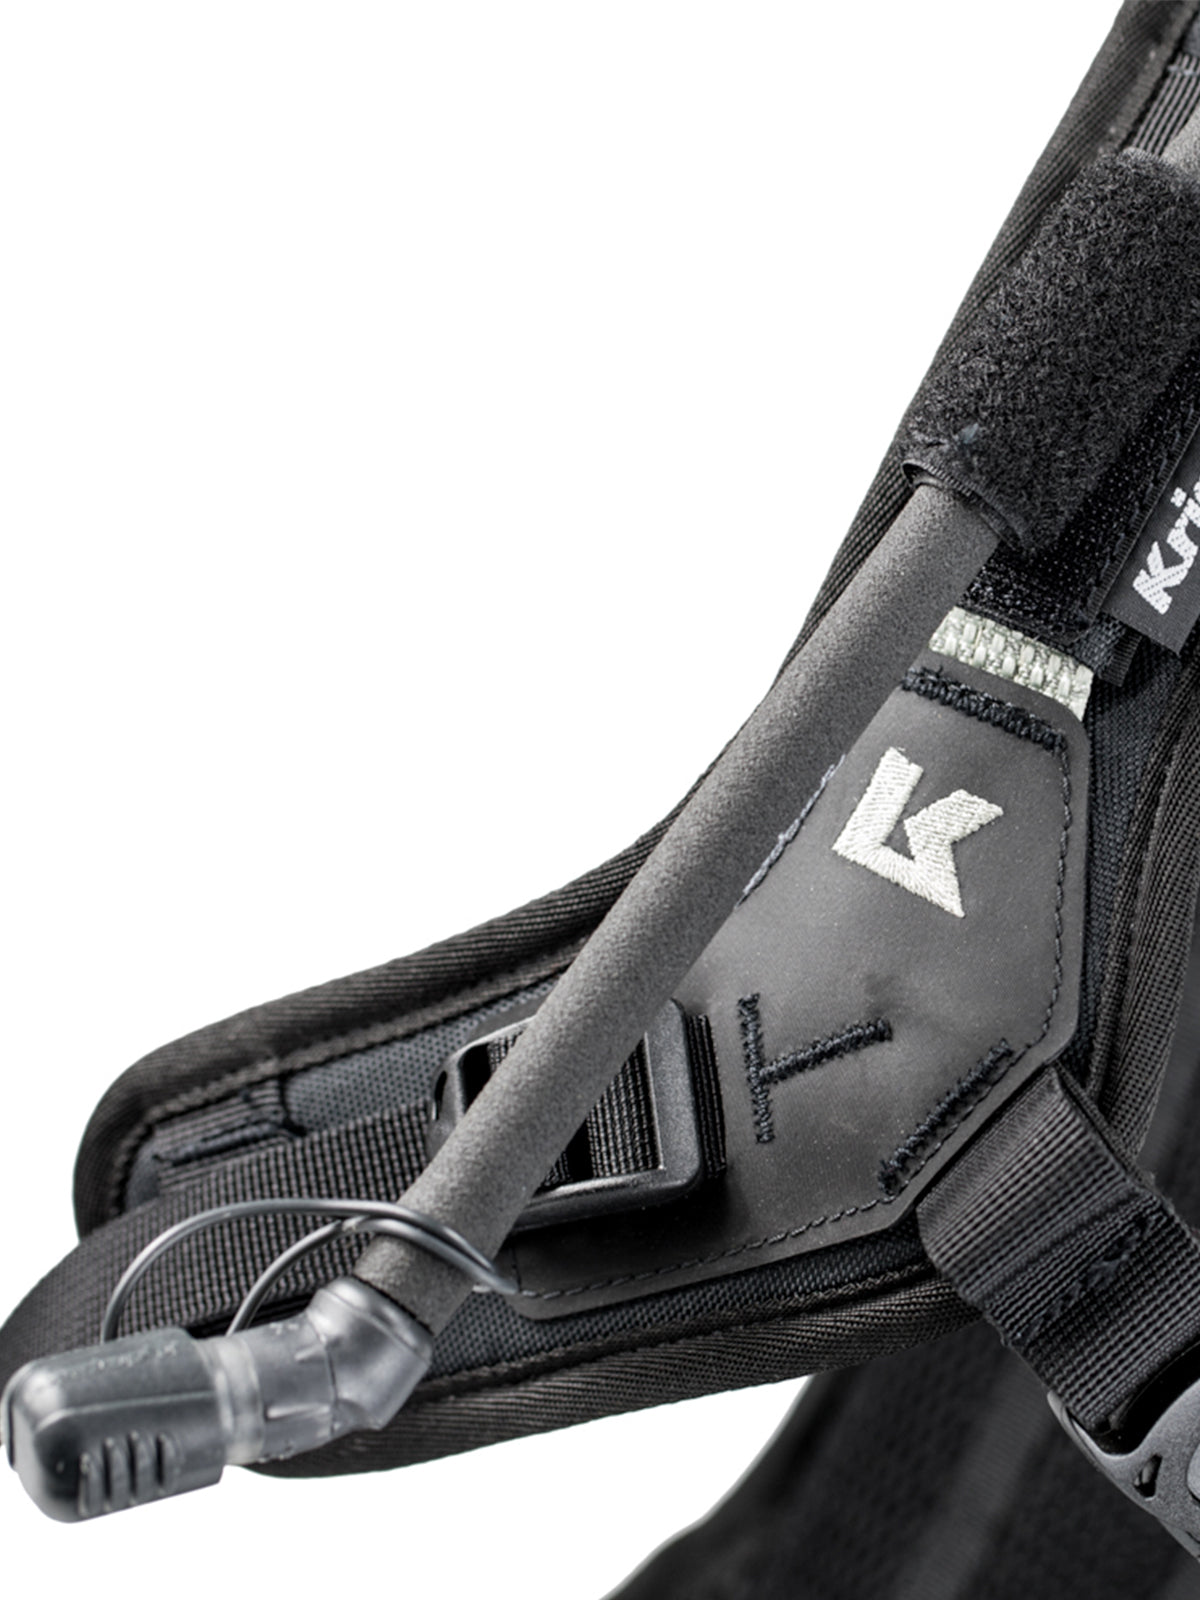 Kriega Hydro-3 Hydration Pack mouth piece